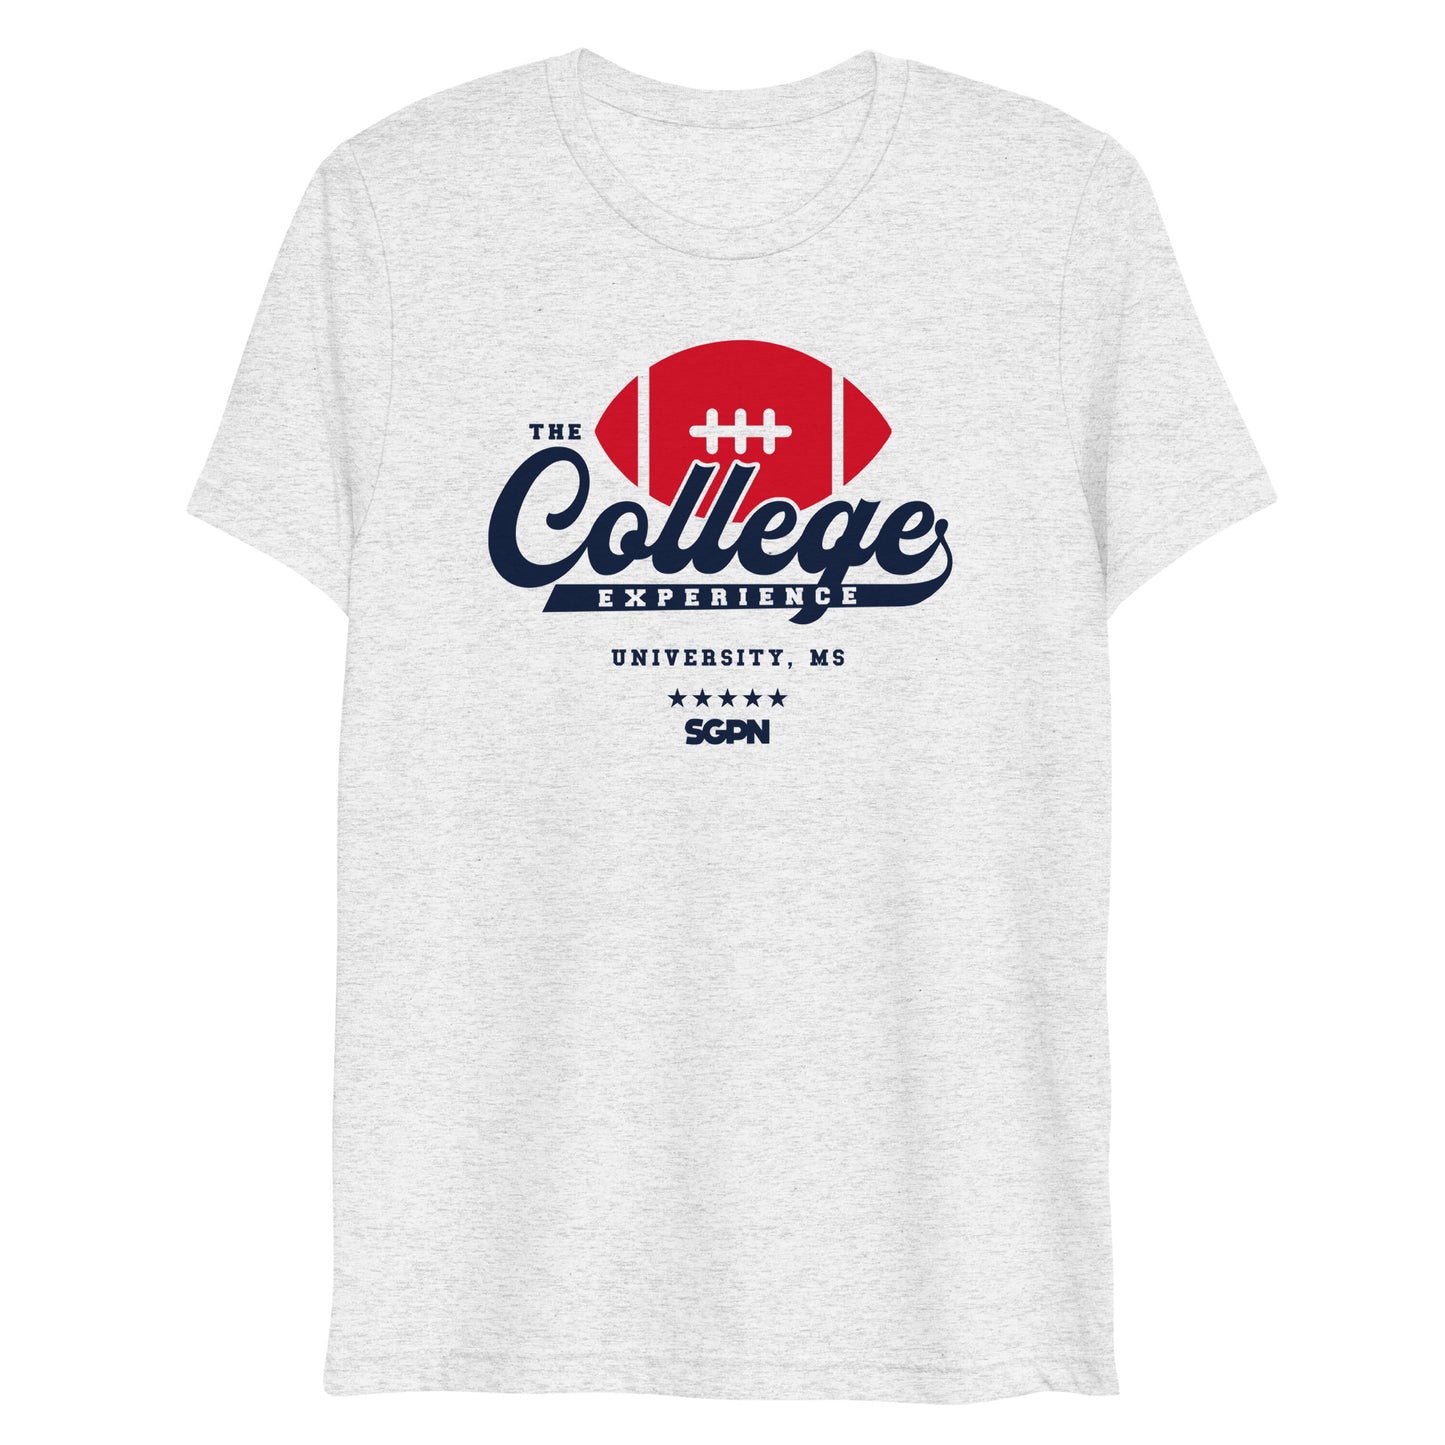 The College Football Experience - University edition - White Fleck Short sleeve t-shirt